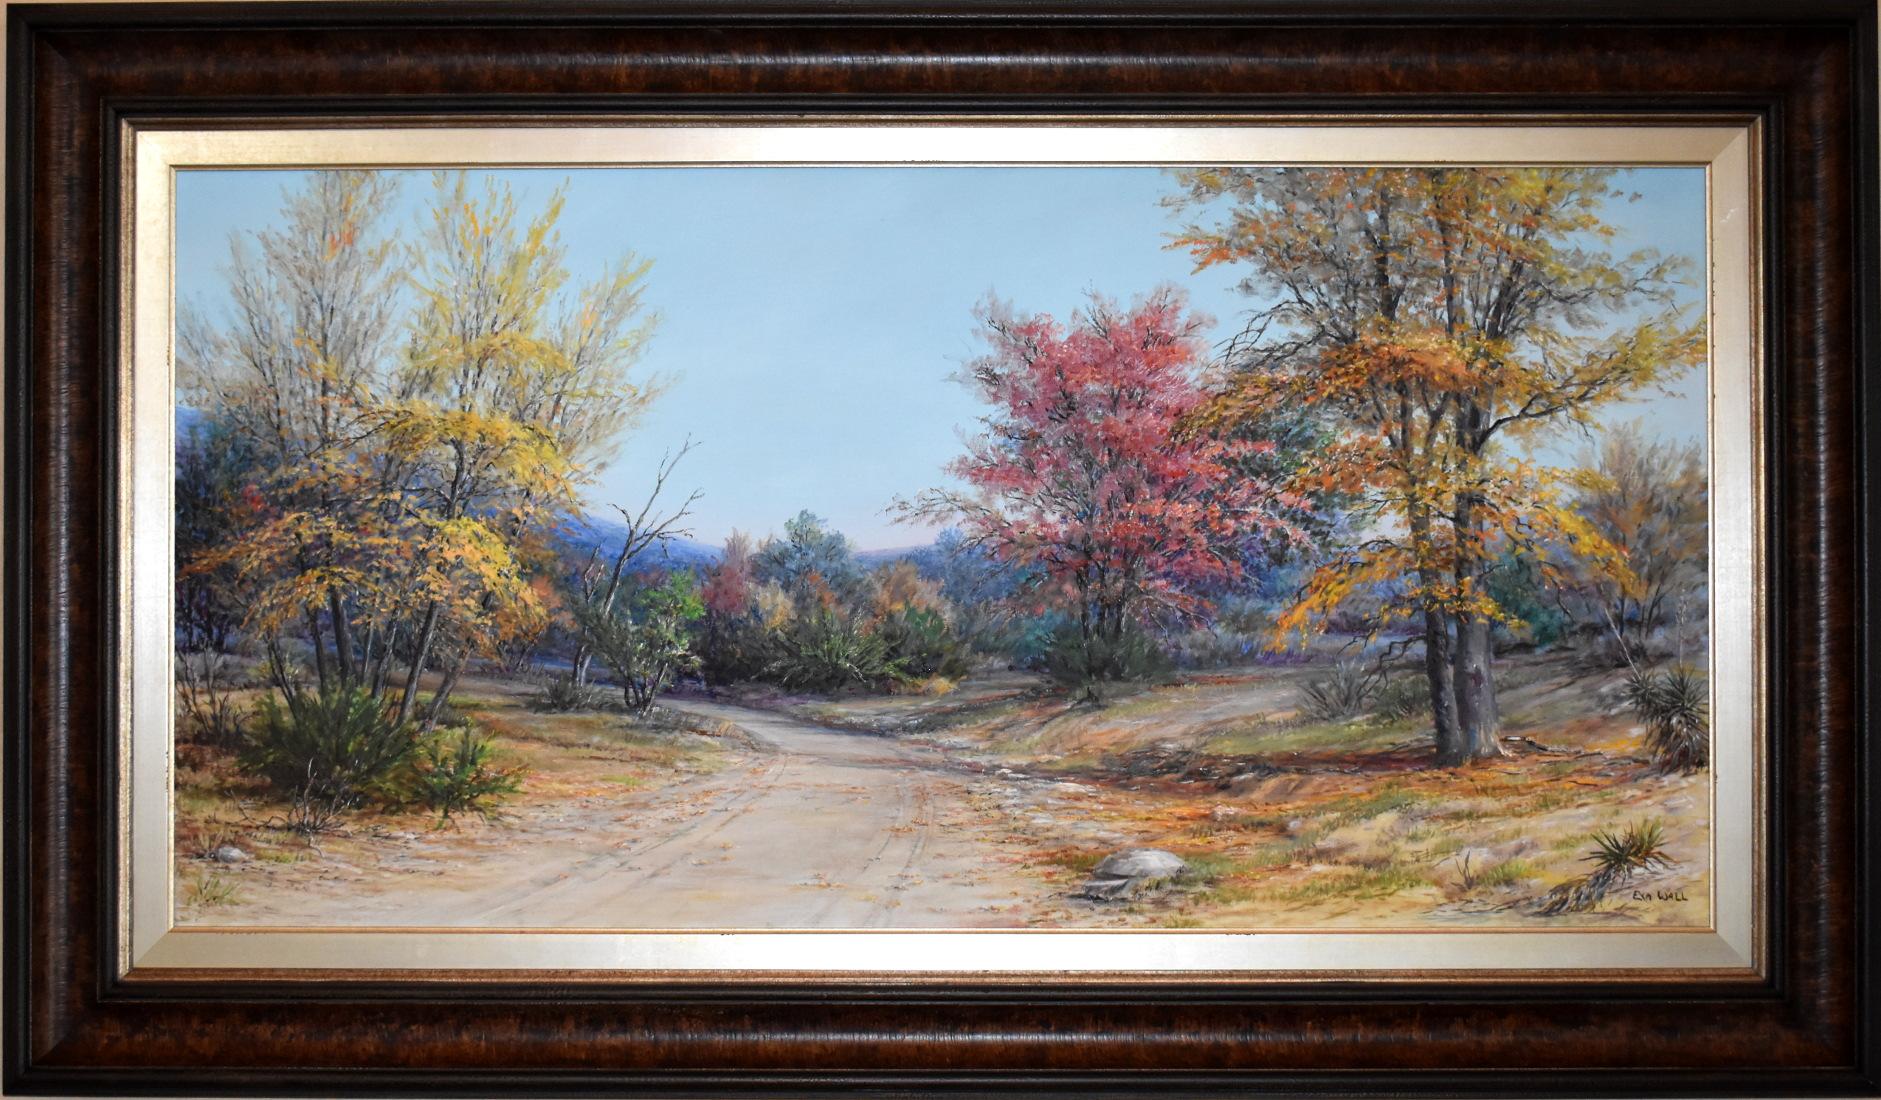 Exa Wall Landscape Painting - "Hill Country Road"   Texas Fall Scene